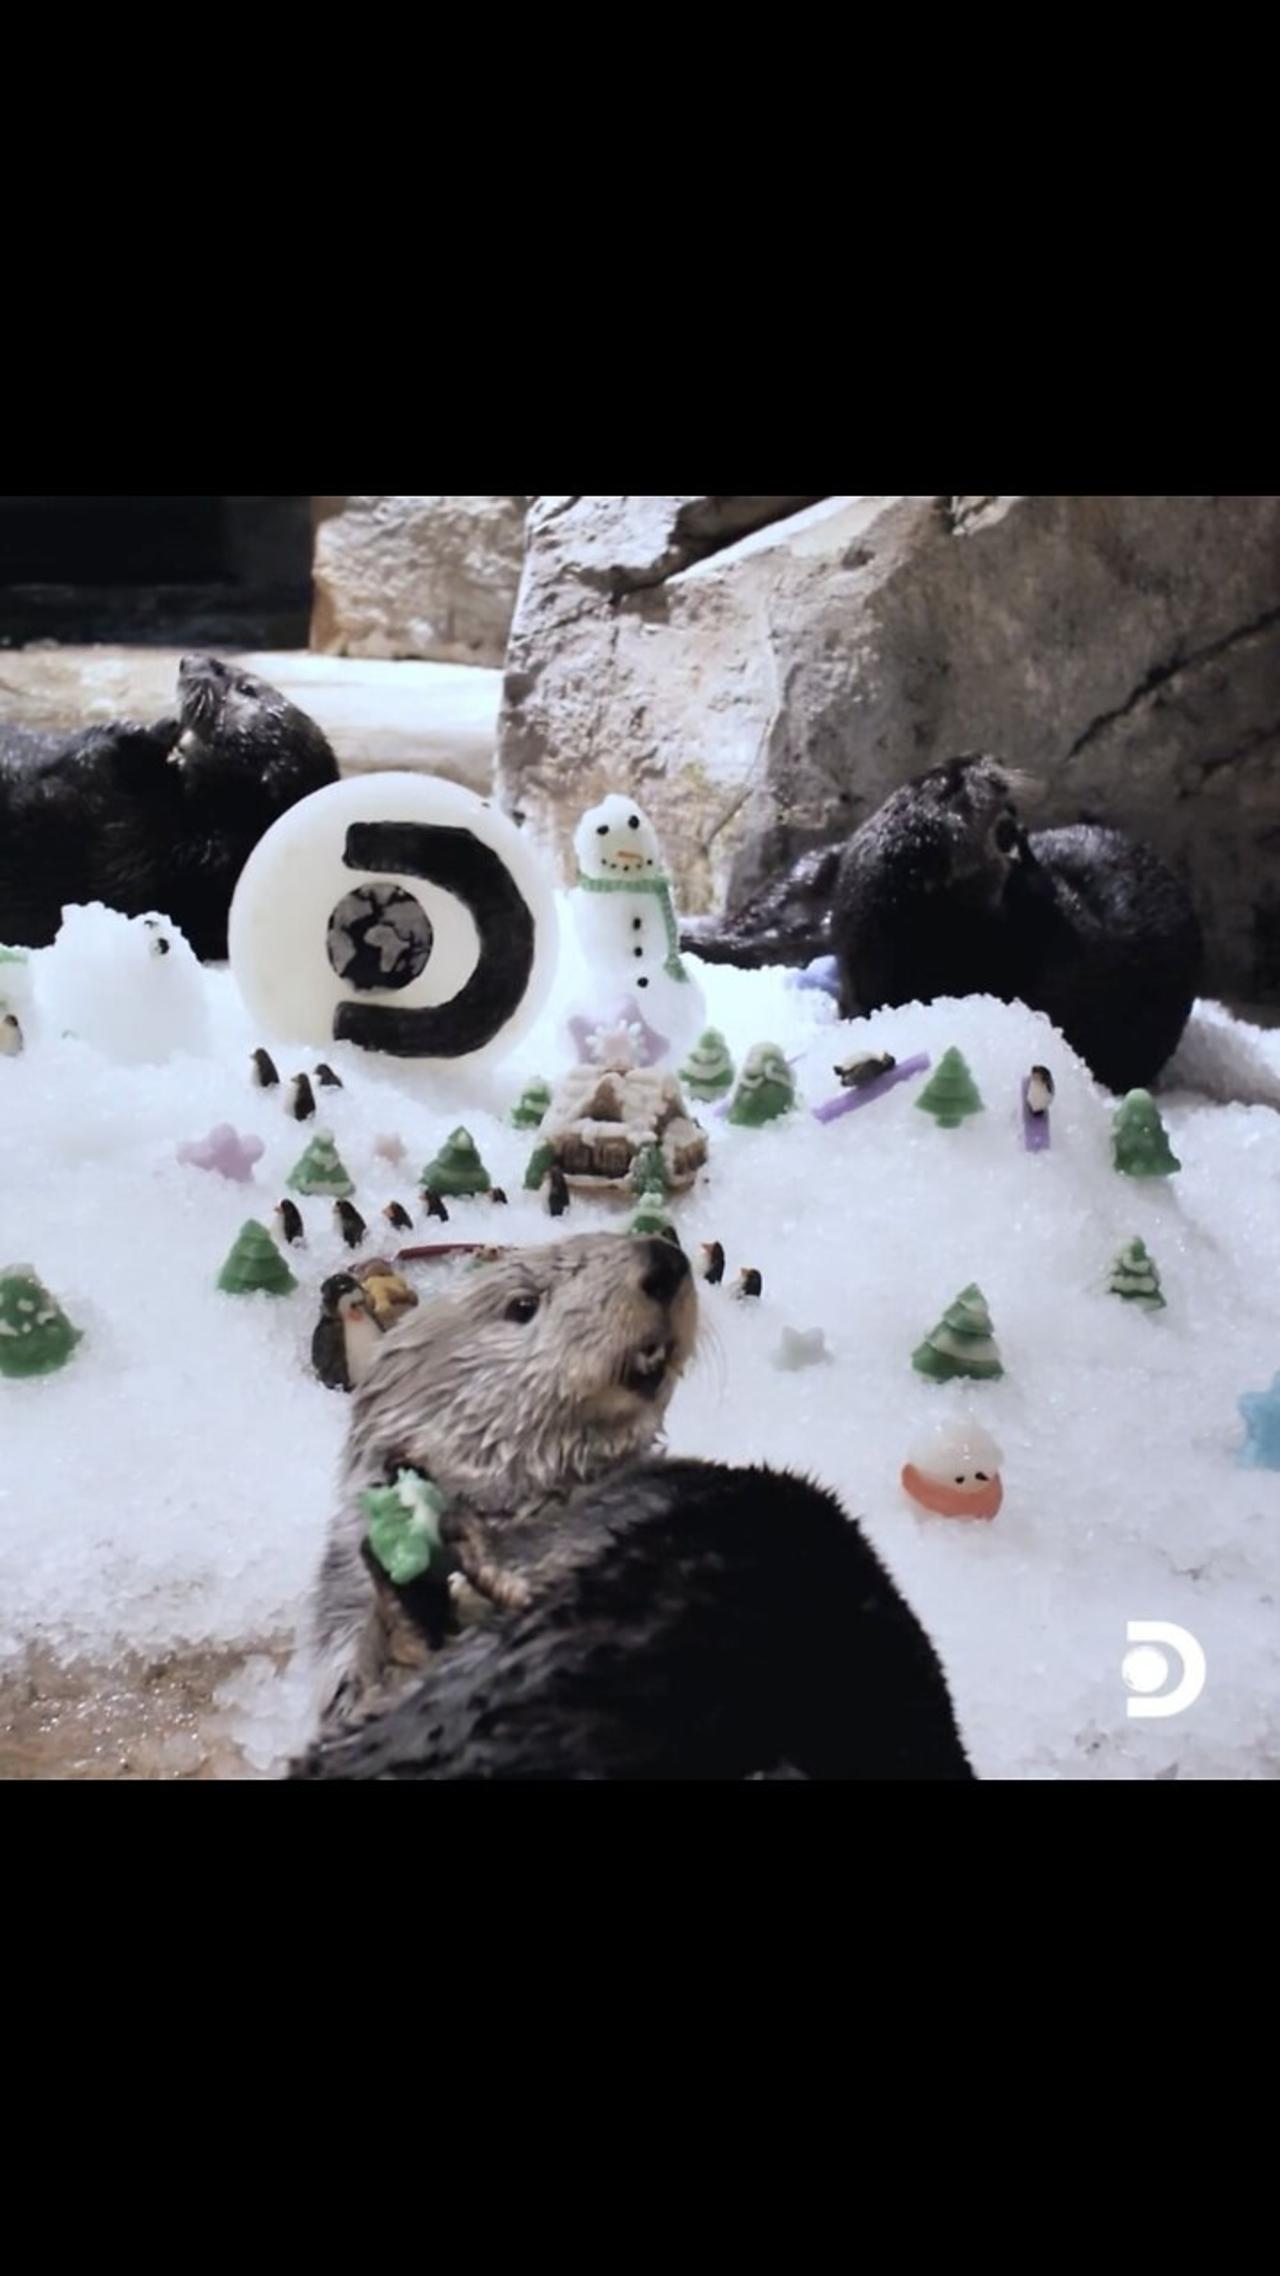 The sea otters at the aquarium are getting into the holiday spirit! 🦦☃️🎁